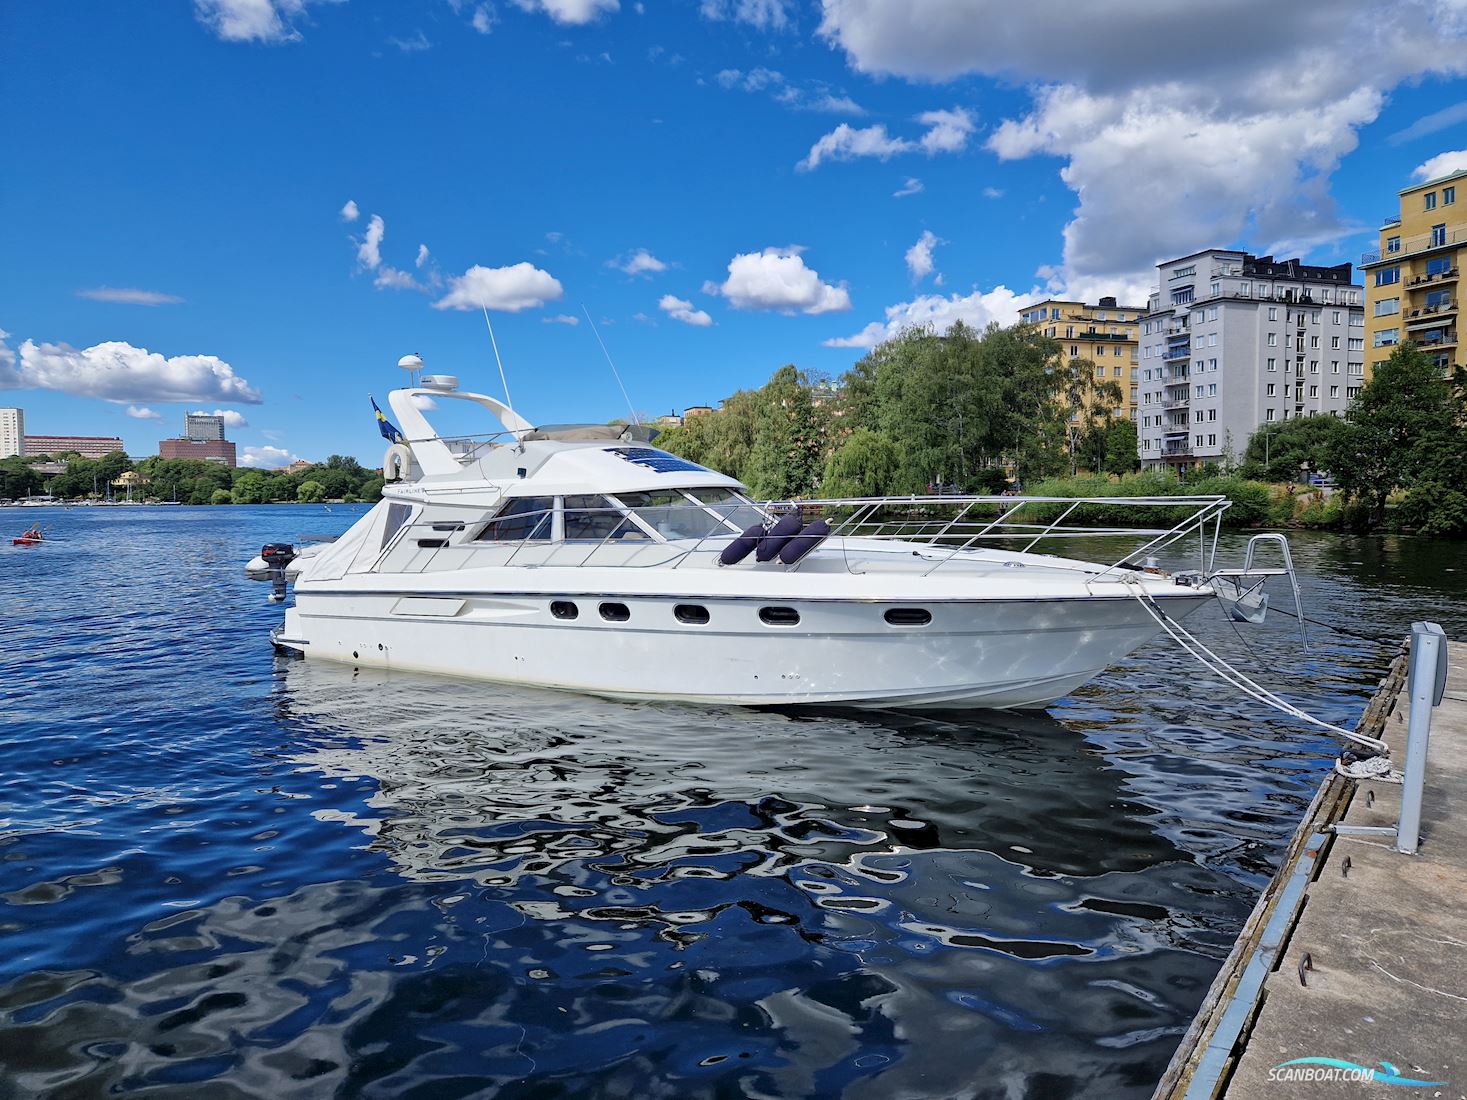 Fairline 43/45 Fly Motor boat 1989, with Tamd 71A engine, Sweden